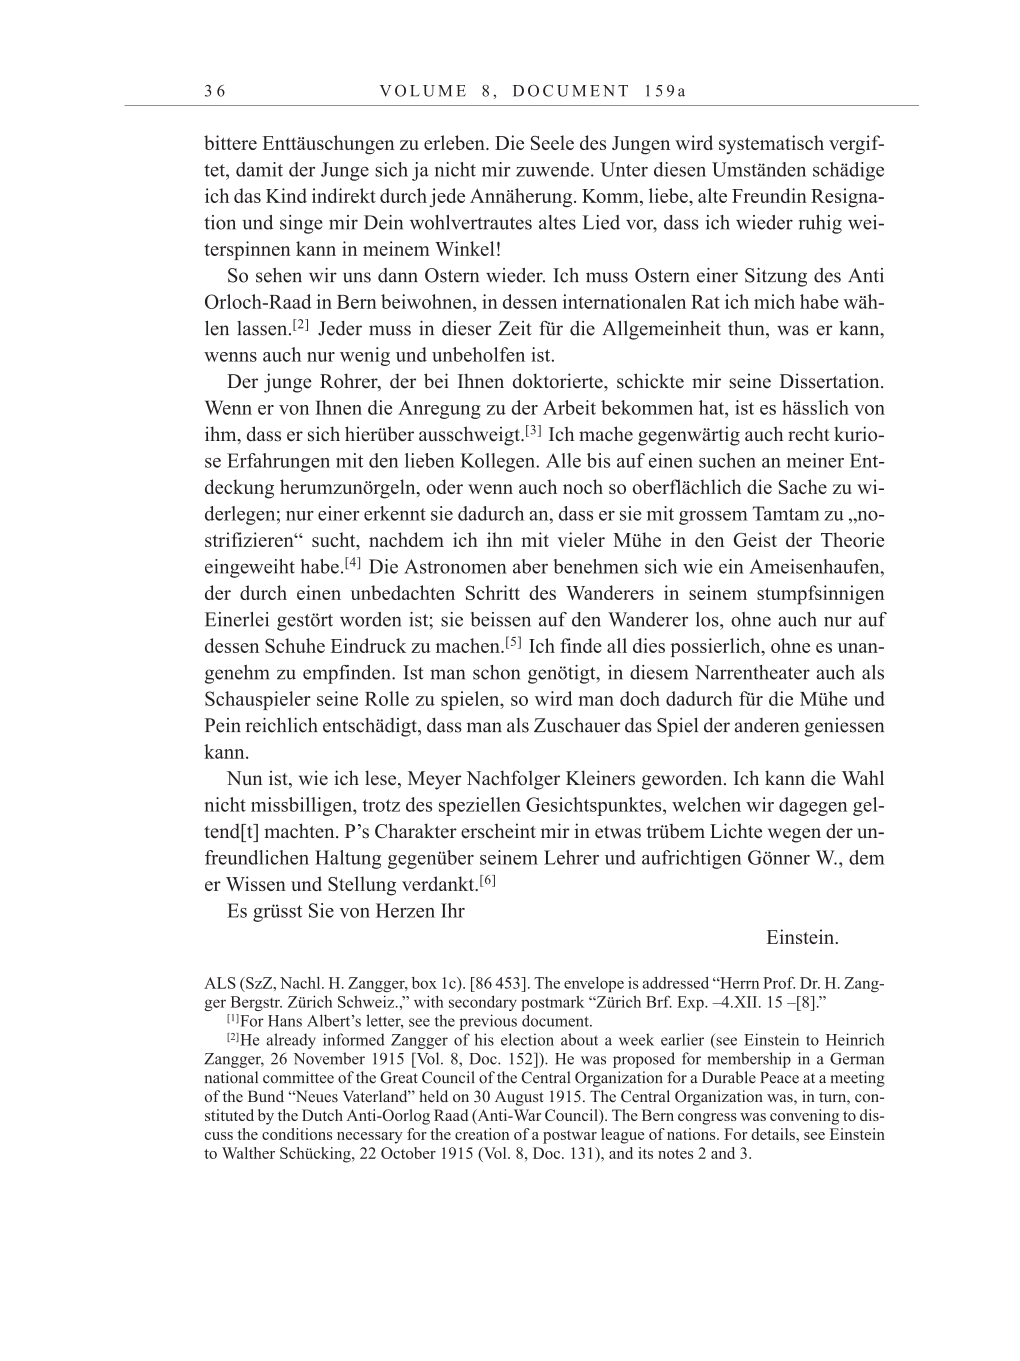 Volume 10: The Berlin Years: Correspondence May-December 1920 / Supplementary Correspondence 1909-1920 page 36